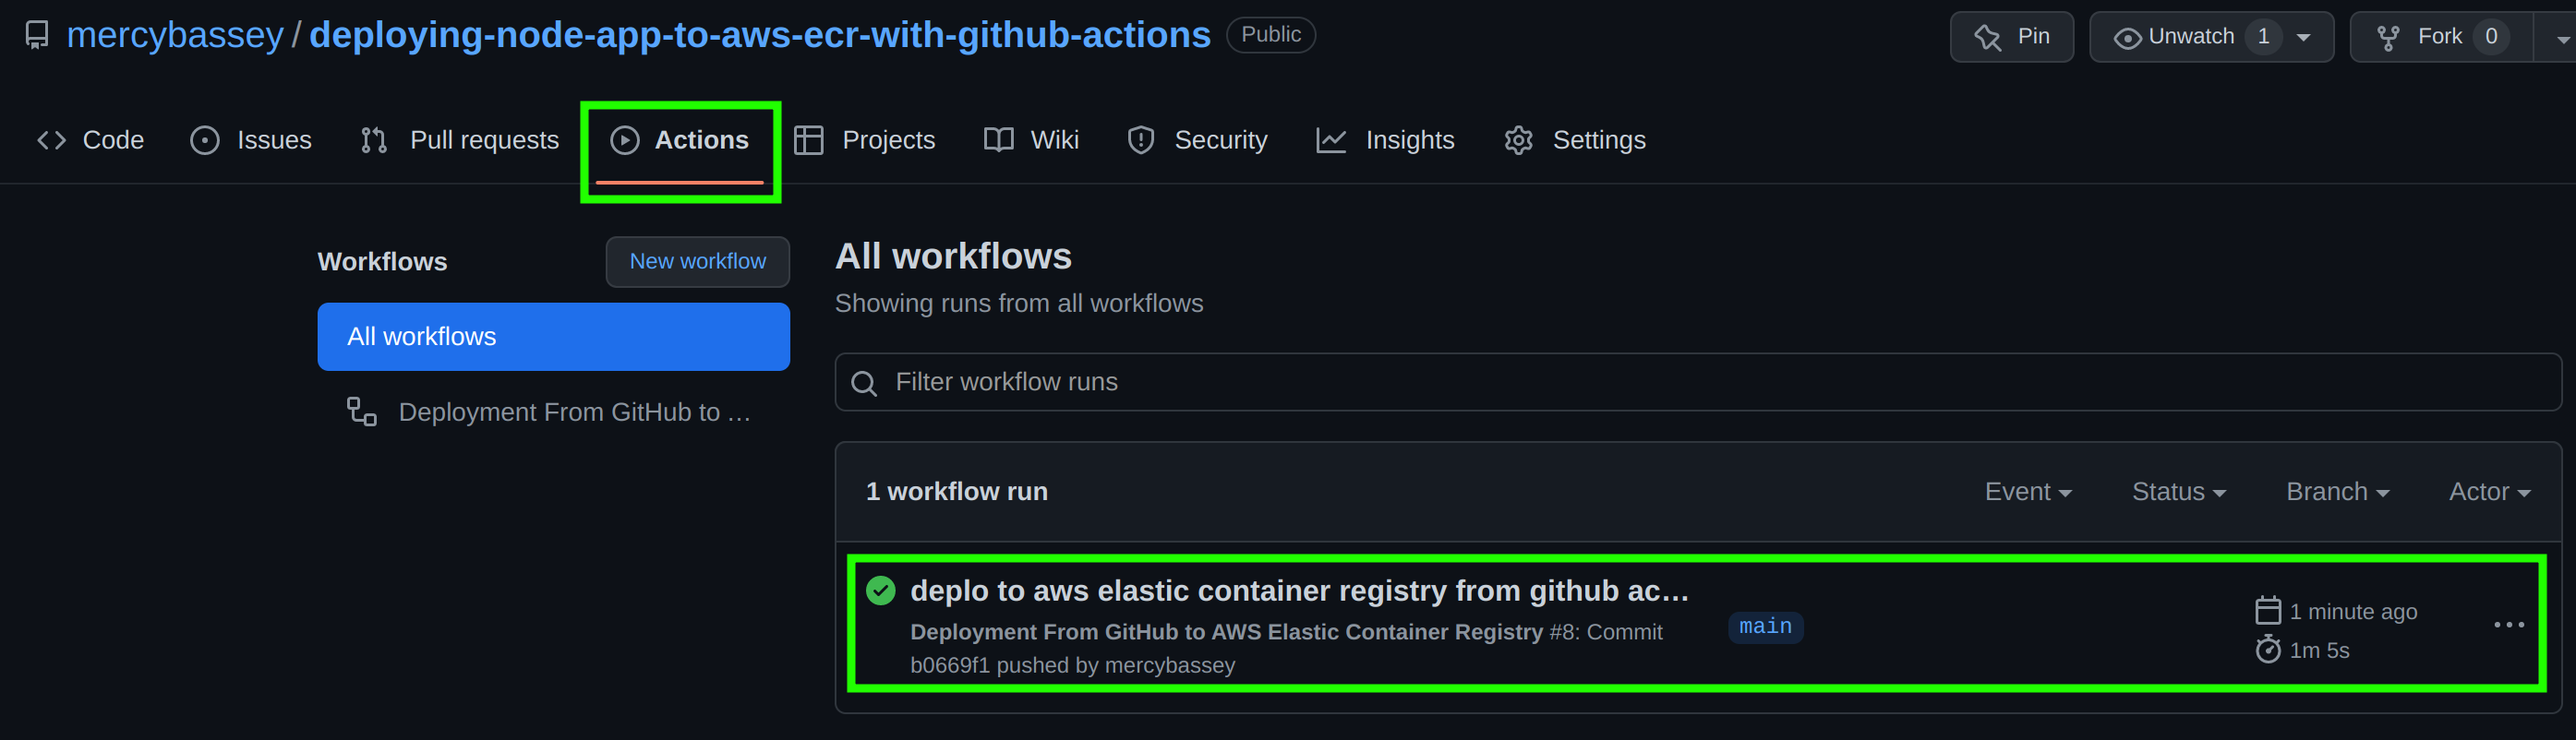 Confirming workflow on GitHub repository